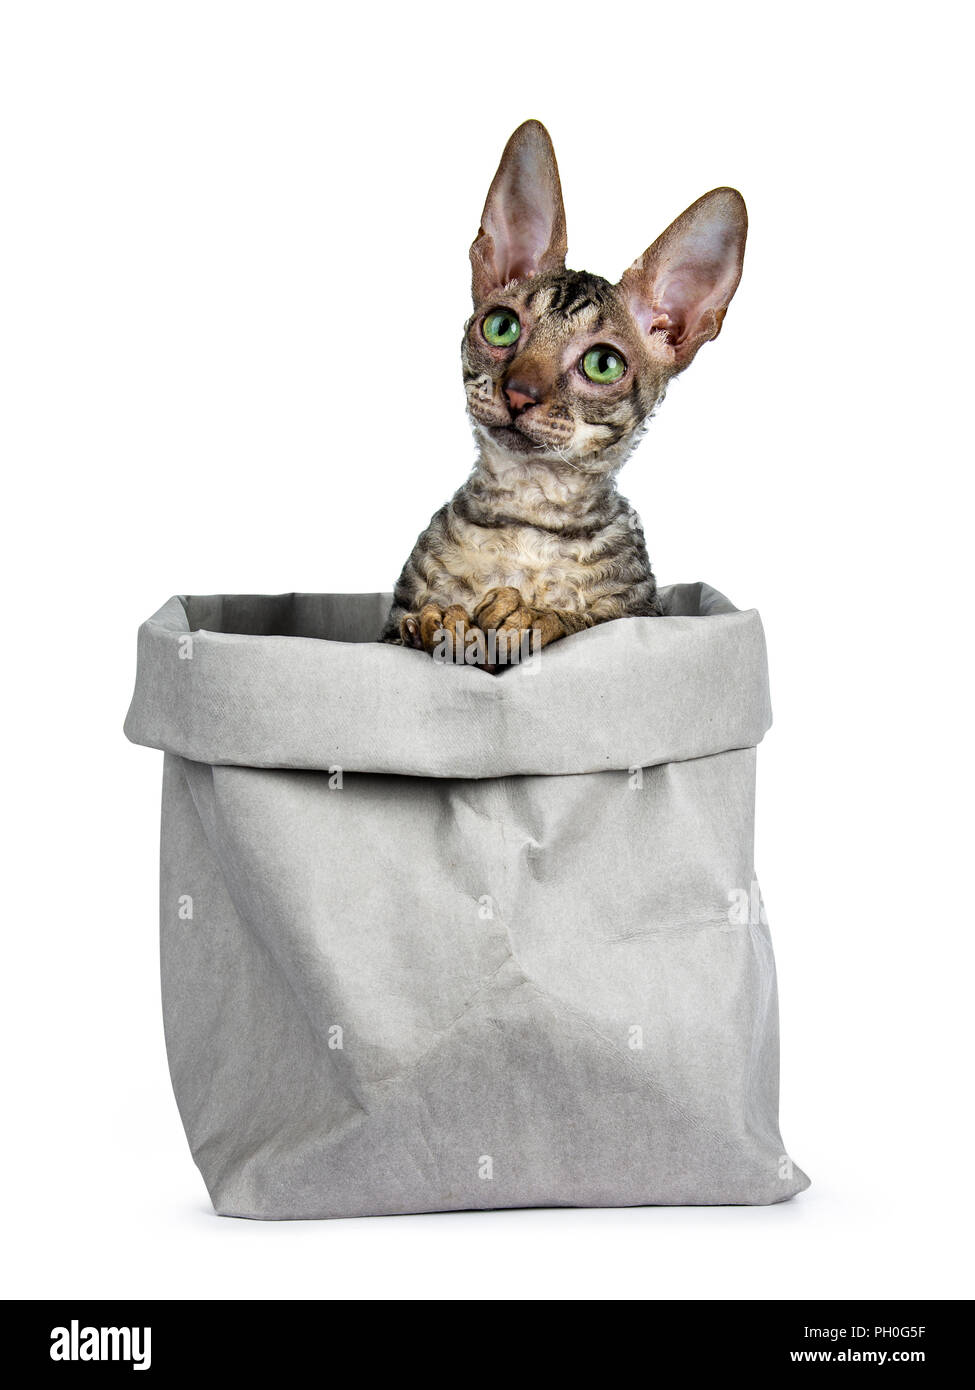 Black tabby Cornish Rex kitten sitting in grey paper bag, looking up with green eyes isolated on white background Stock Photo